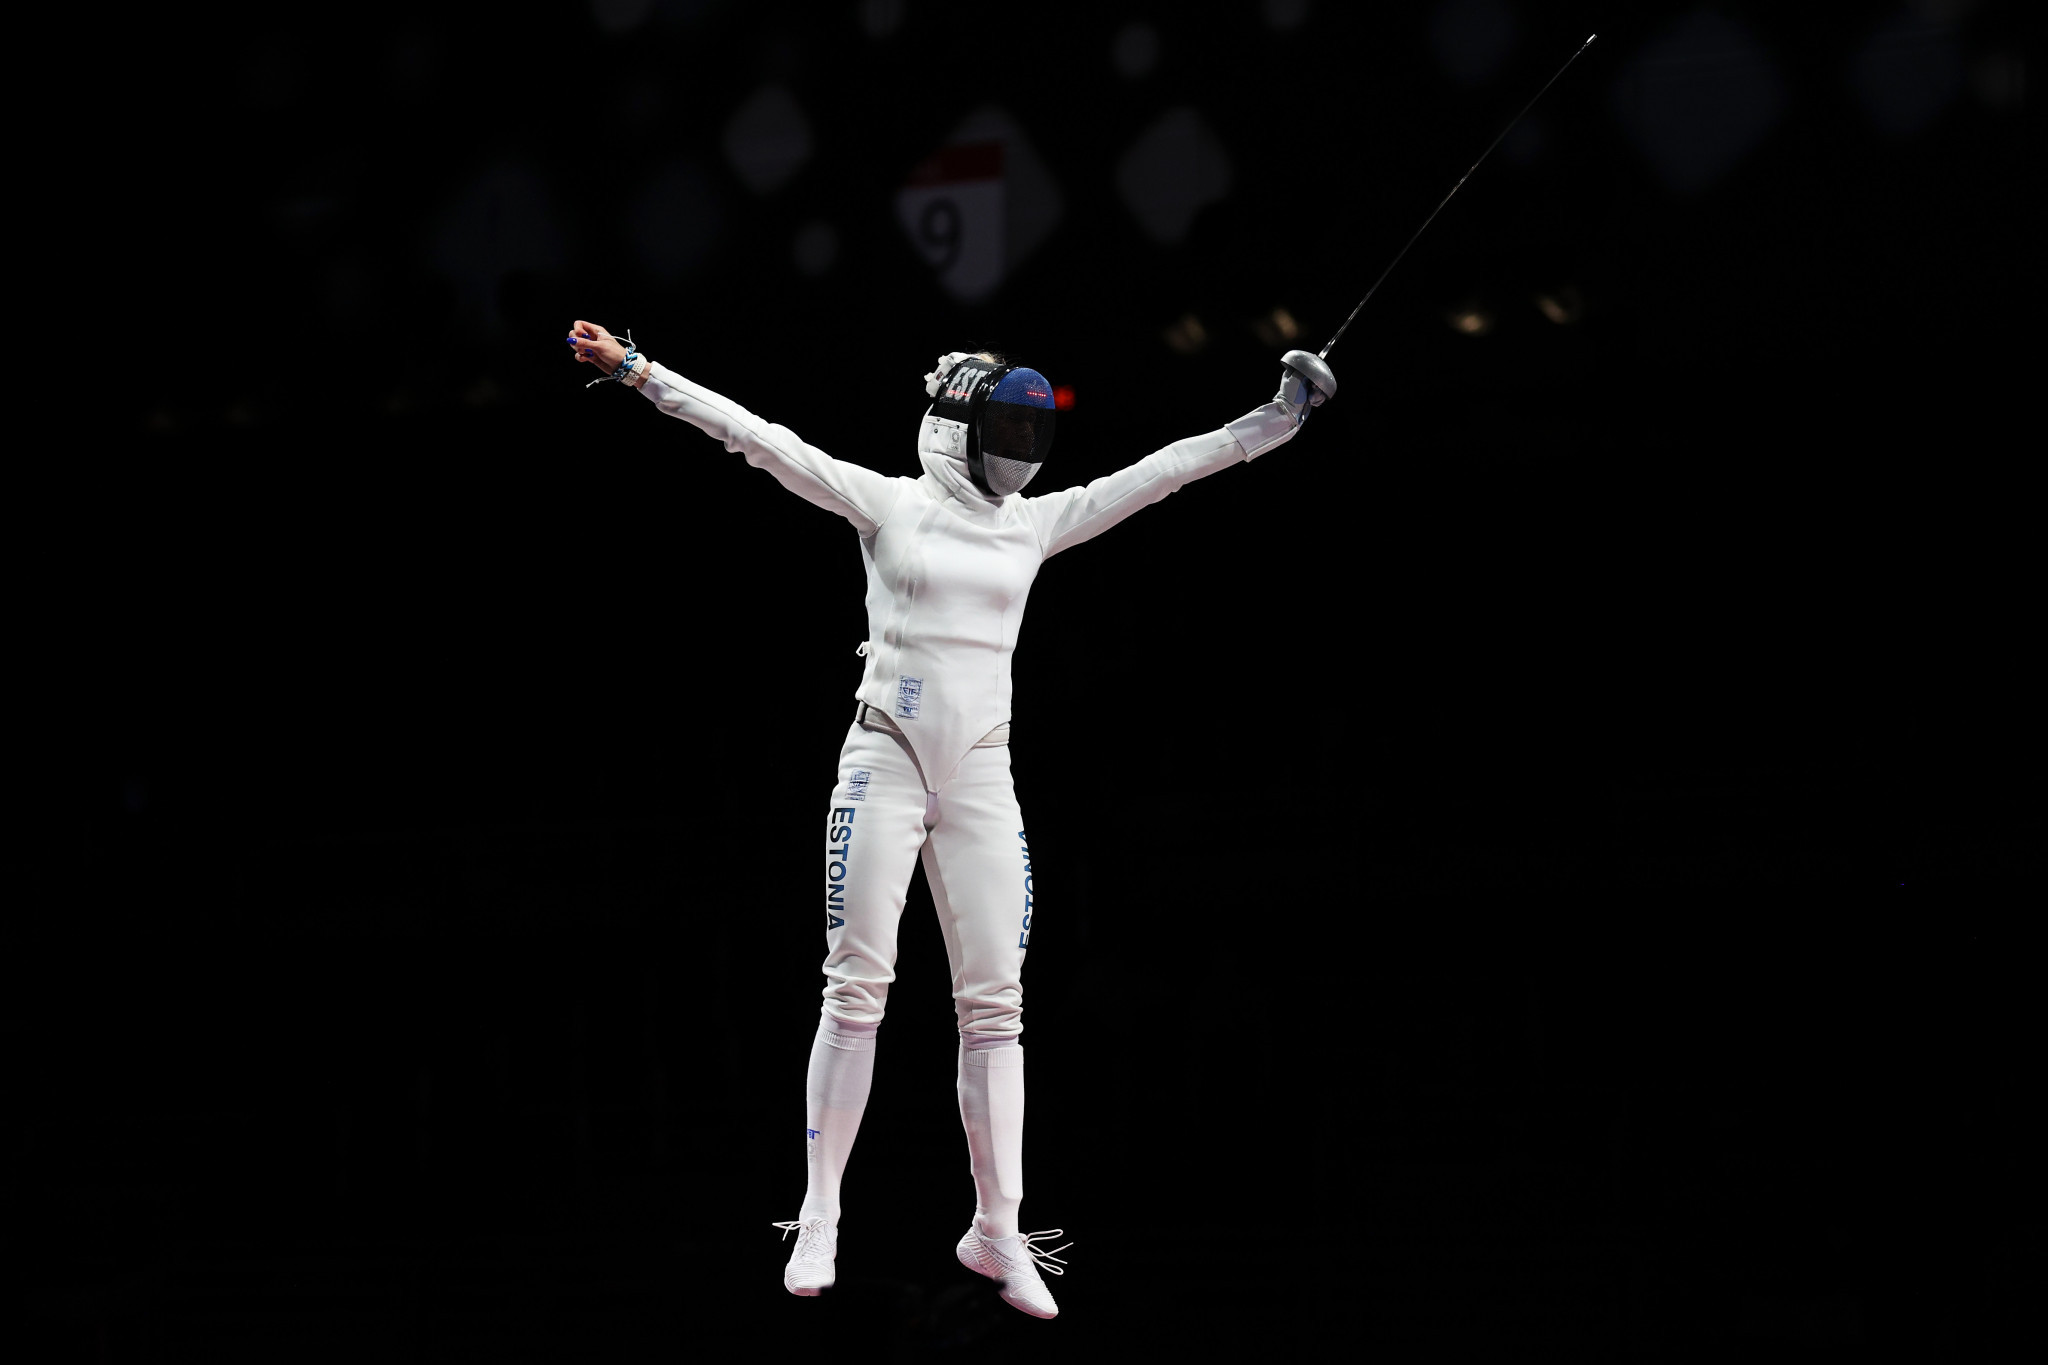 Estonia's Katrina Lehris, winner of an Olympic gold medal in the team discipline at Tokyo 2020, heads the field for the épée World Cup in Barcelona ©Getty Images